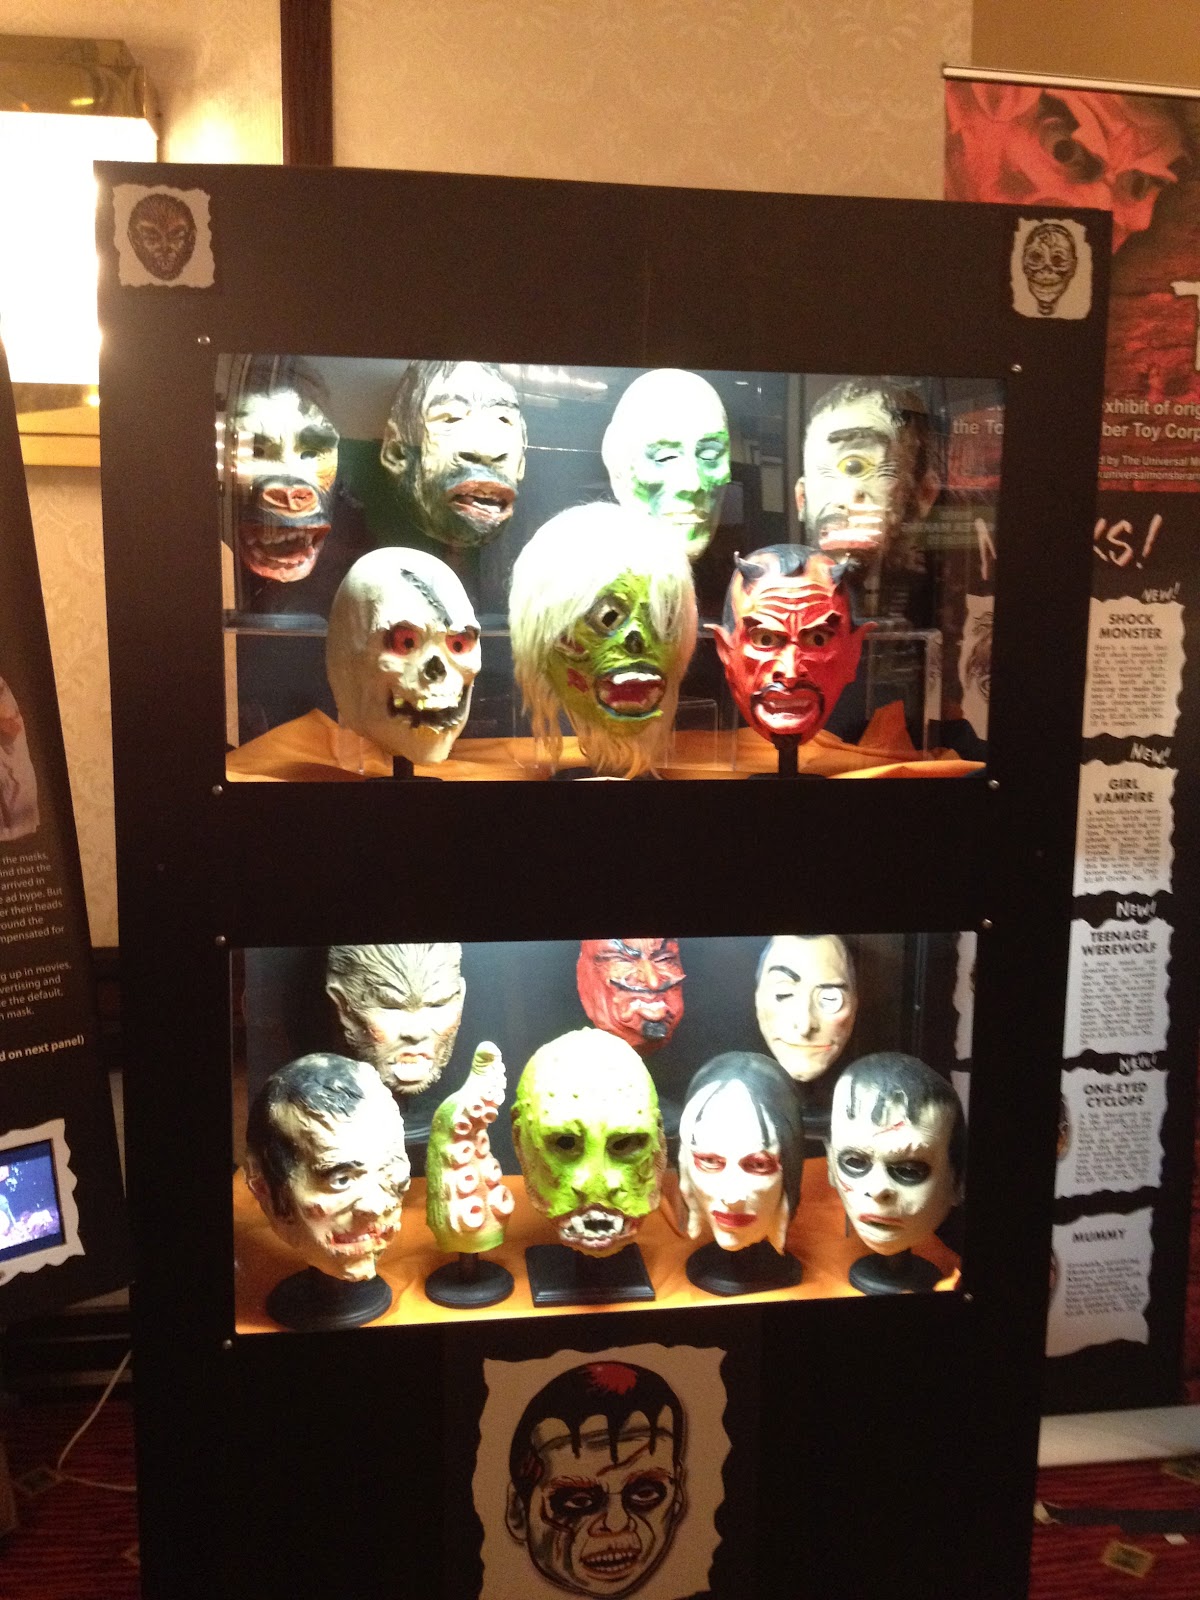 Topstone Mask Display, This selection of Topstone horror ma…